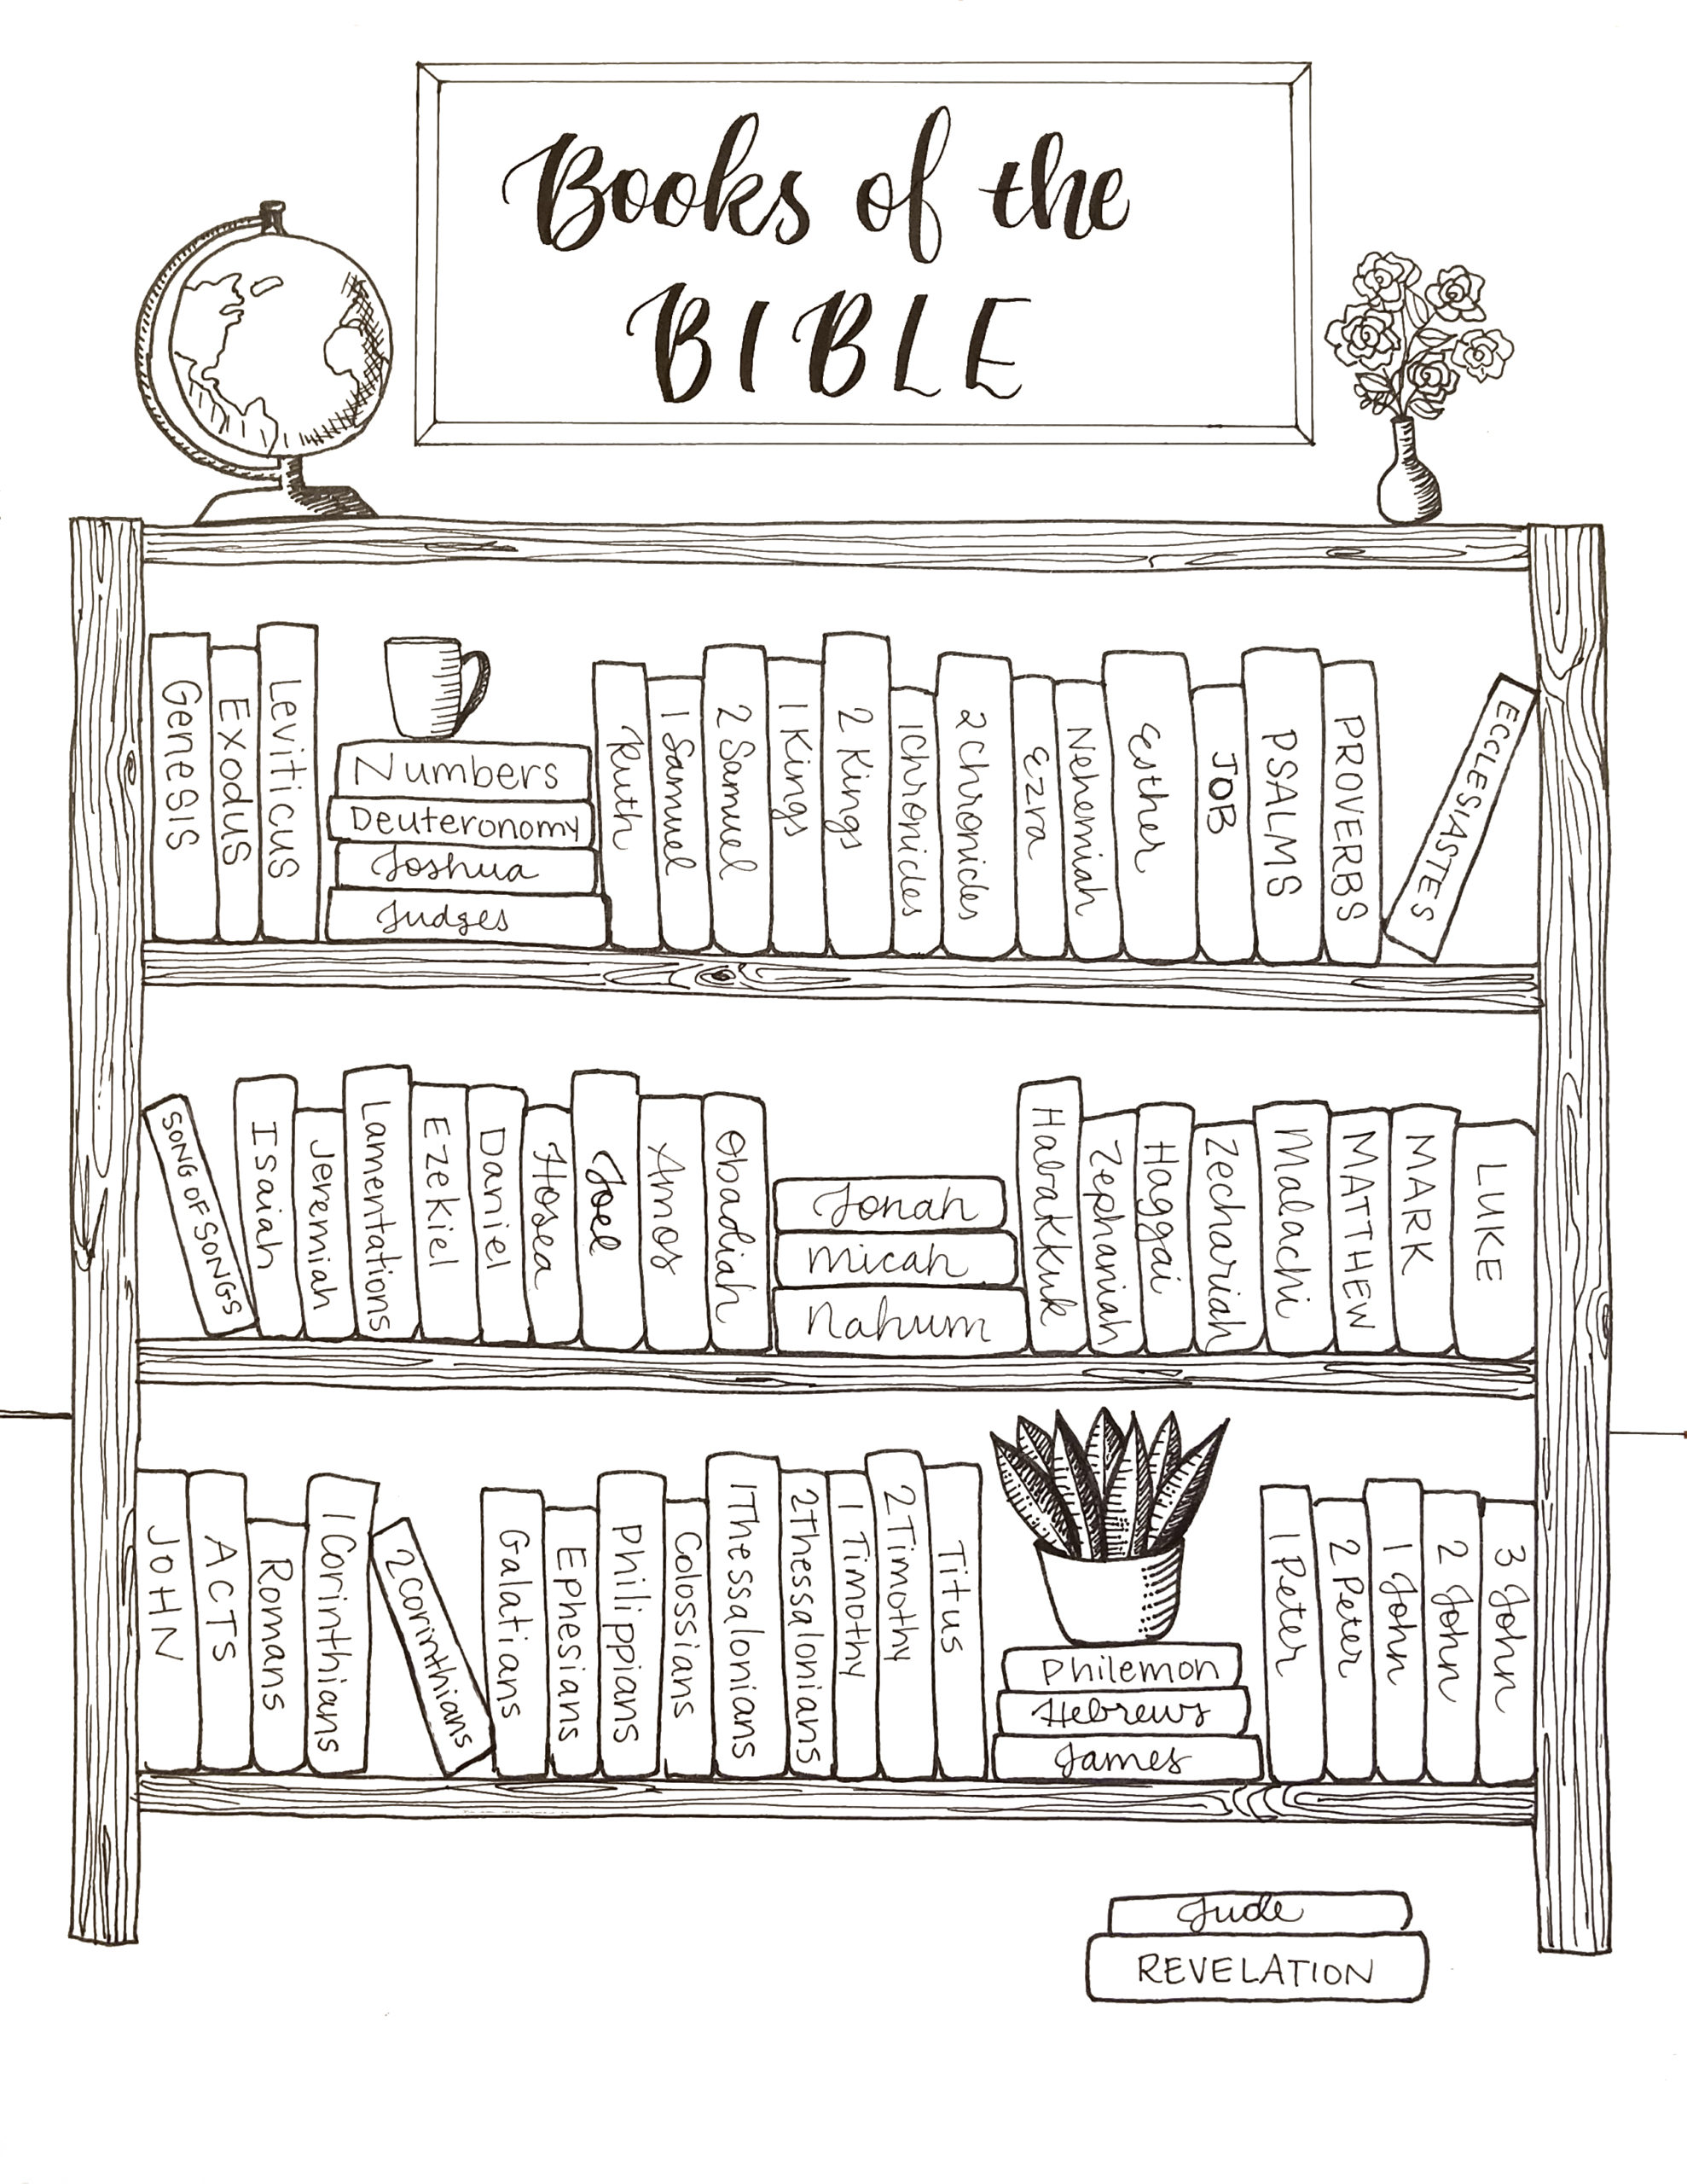 Books of the bible printable coloring tracker